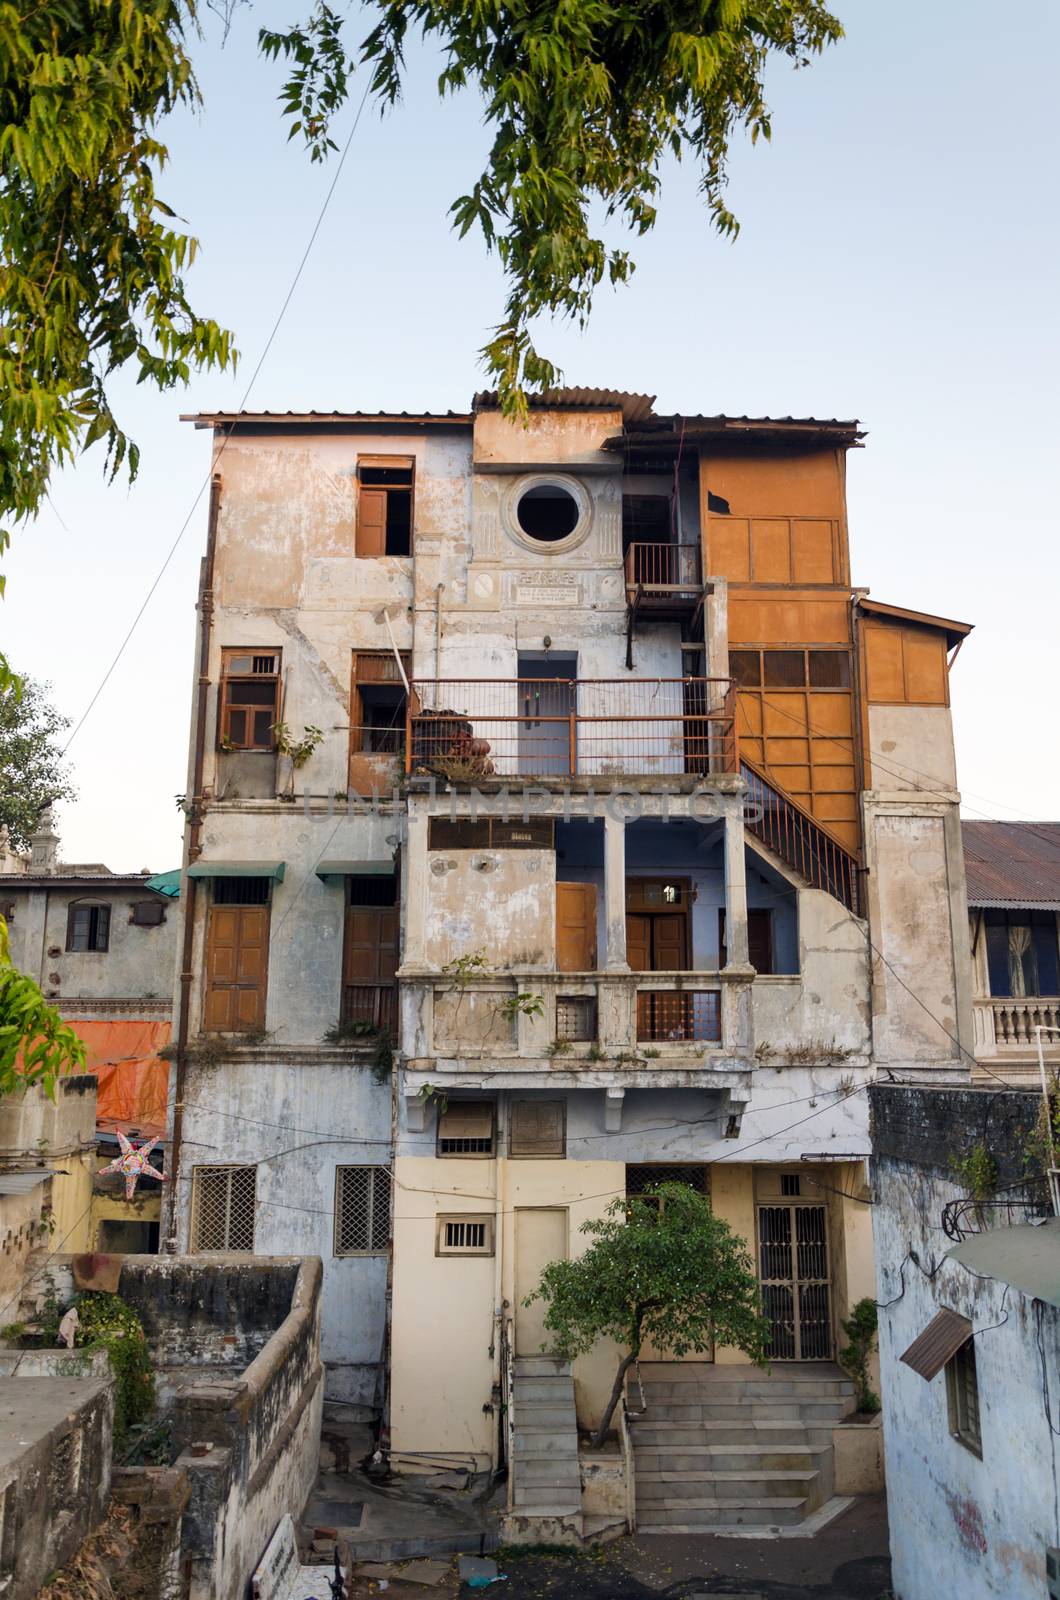 Old concrete house in Ahmedabad by siraanamwong